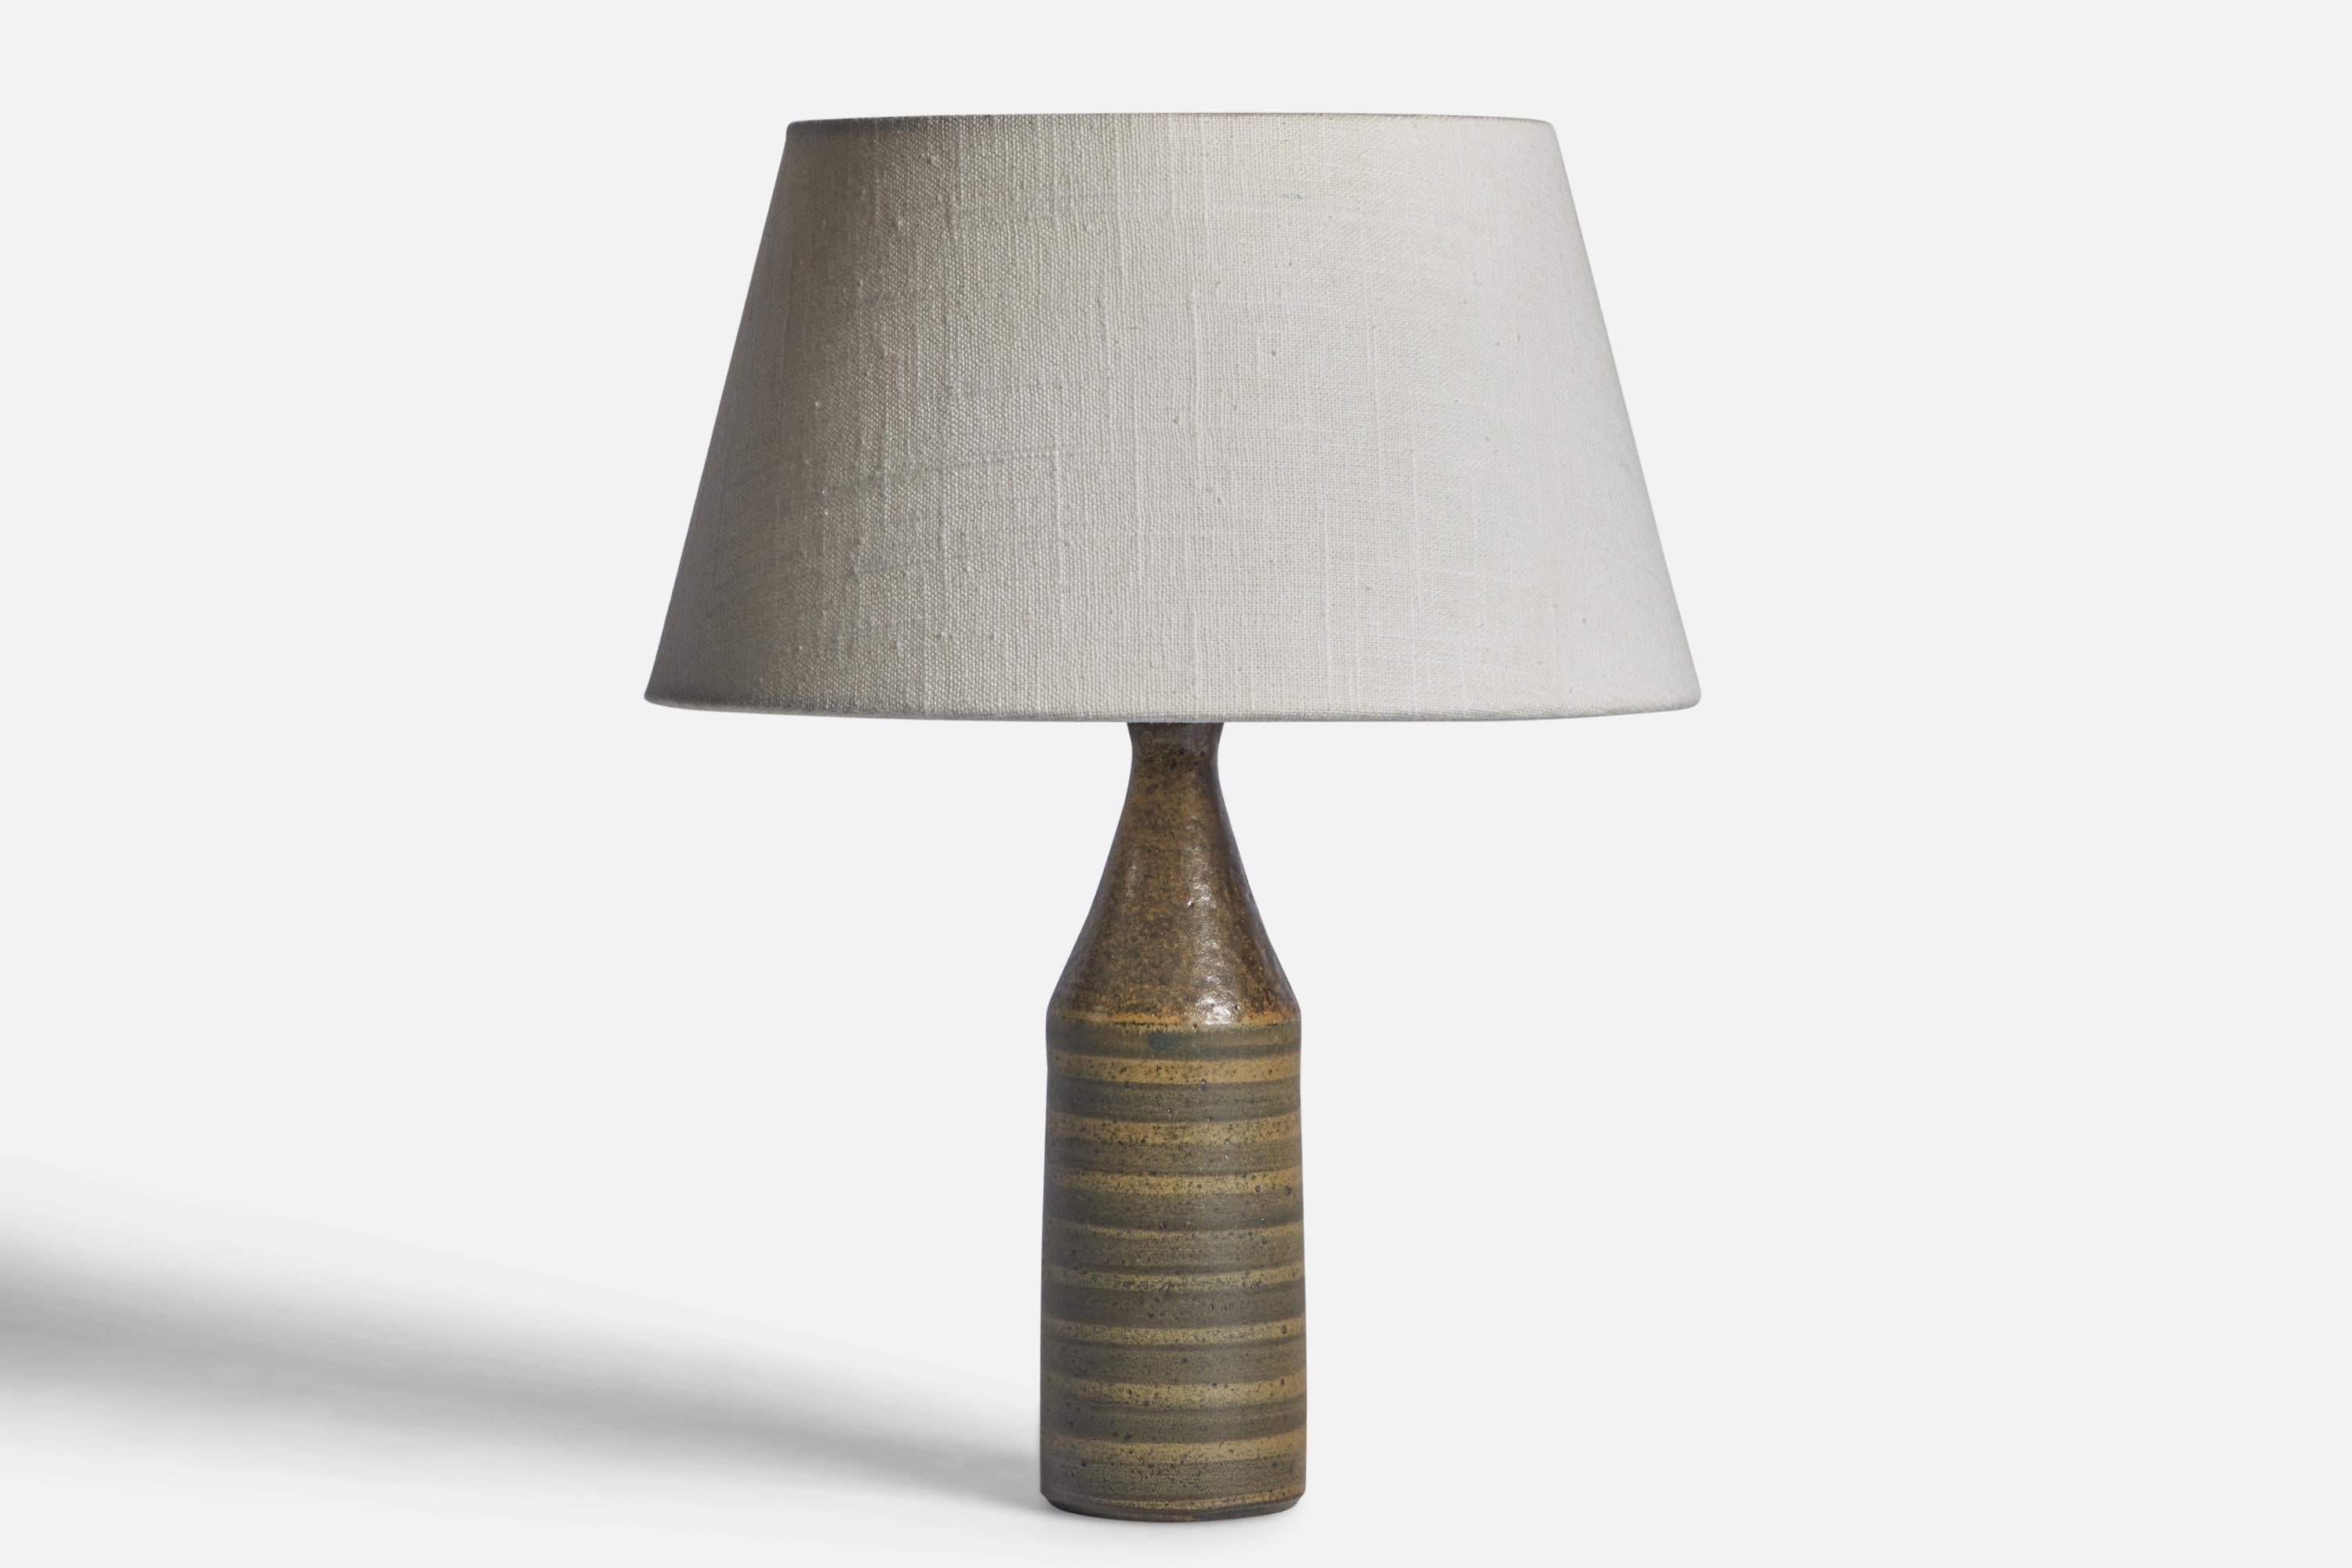 A brown beige and green-glazed stoneware table lamp designed and produced by Wallåkra, Sweden, c. 1950s.

Dimensions of Lamp (inches): 9.85” H x 2.55” Diameter
Dimensions of Shade (inches): 7” Top Diameter x 10” Bottom Diameter x 5.5” H 
Dimensions